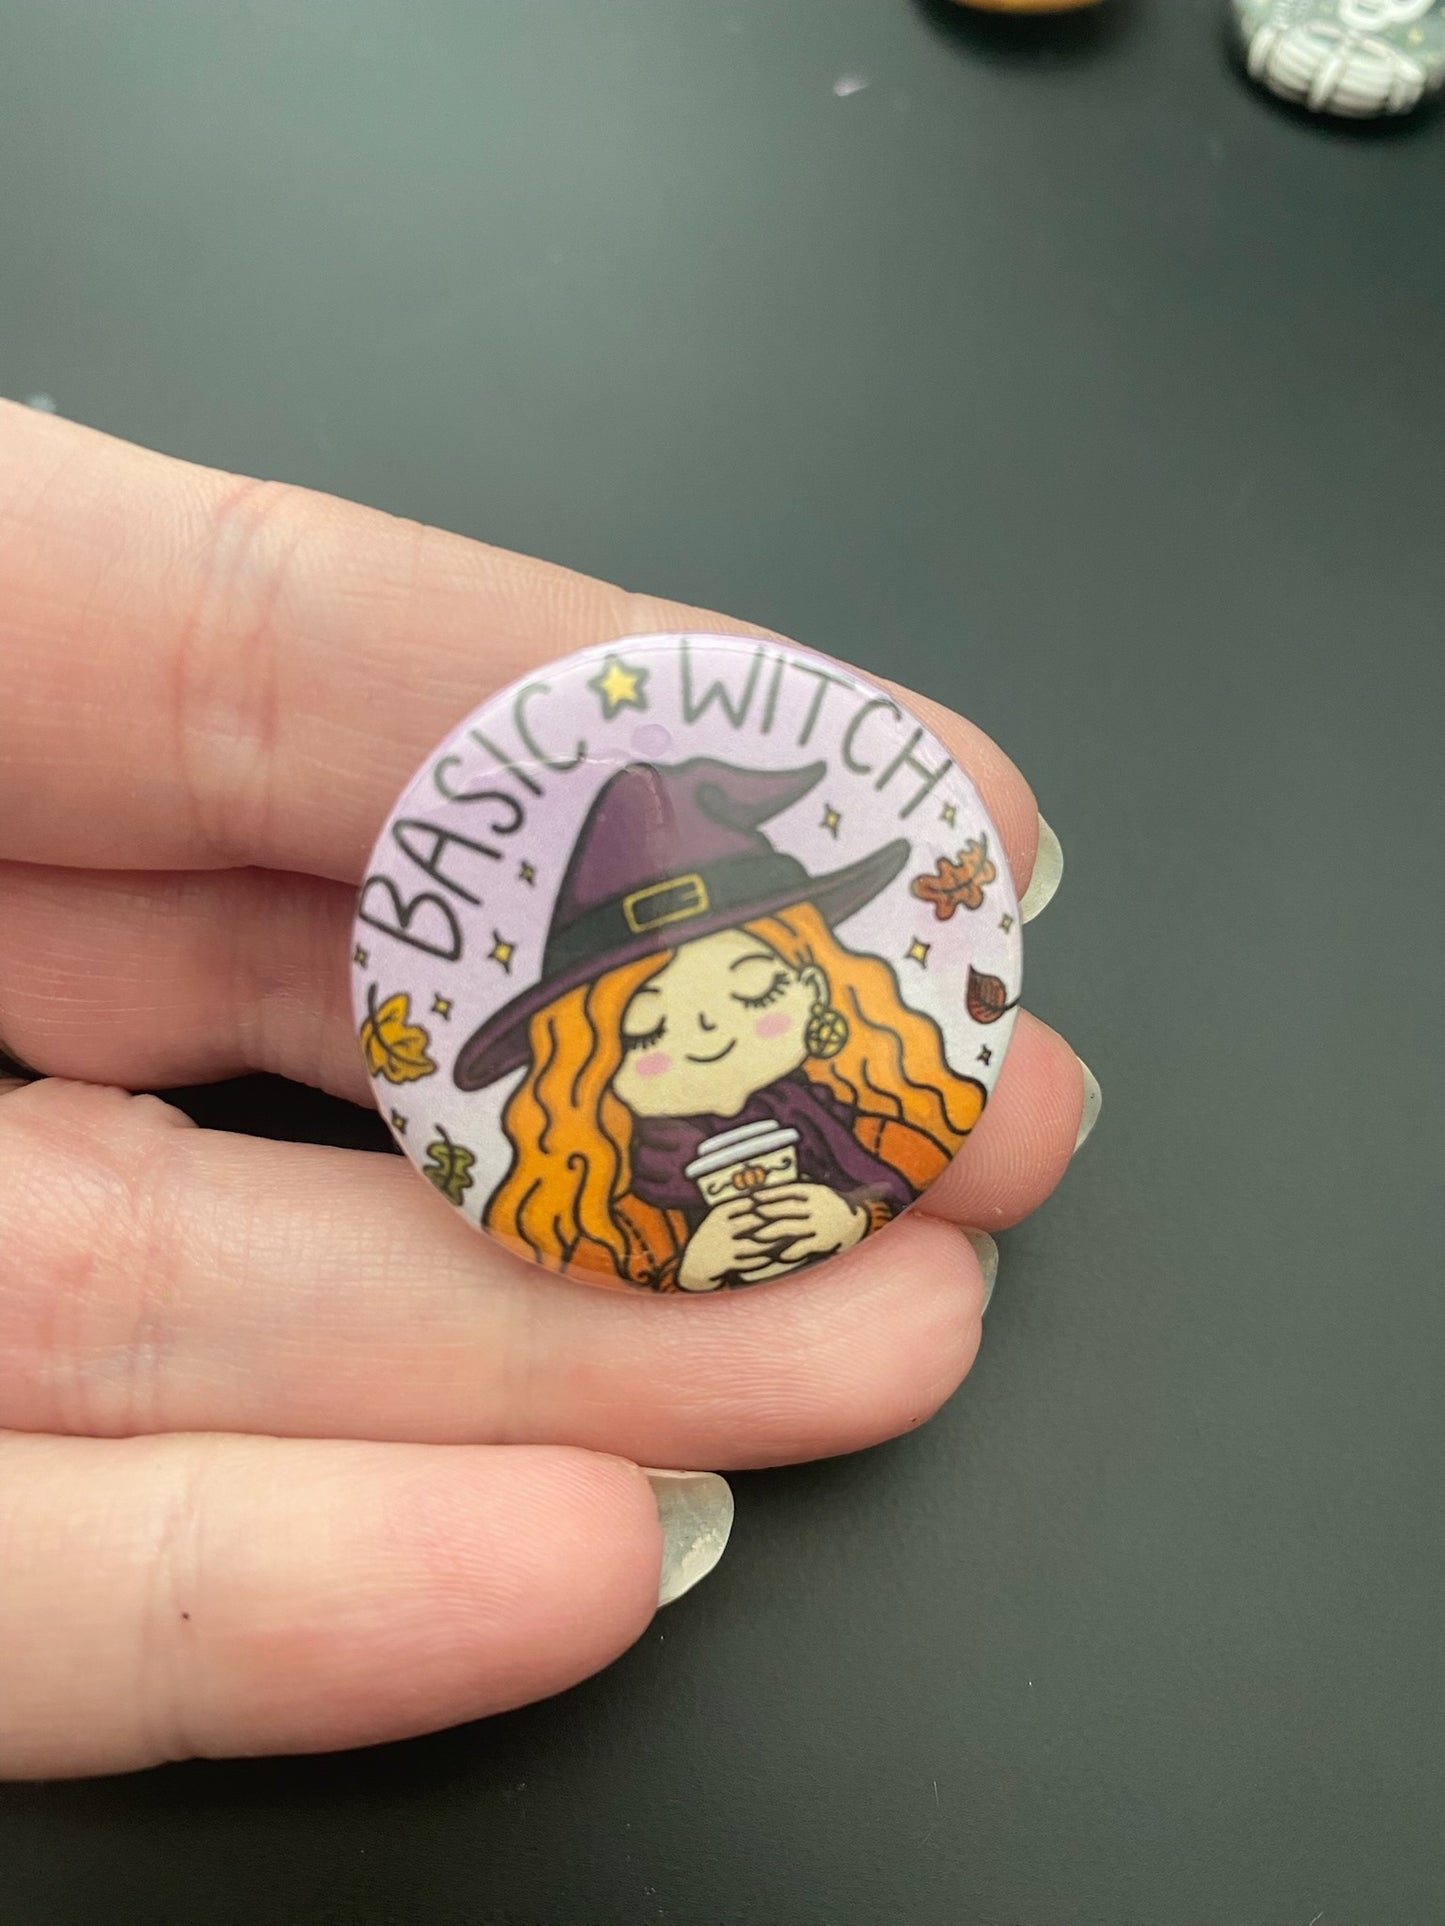 Basic Witch button badge